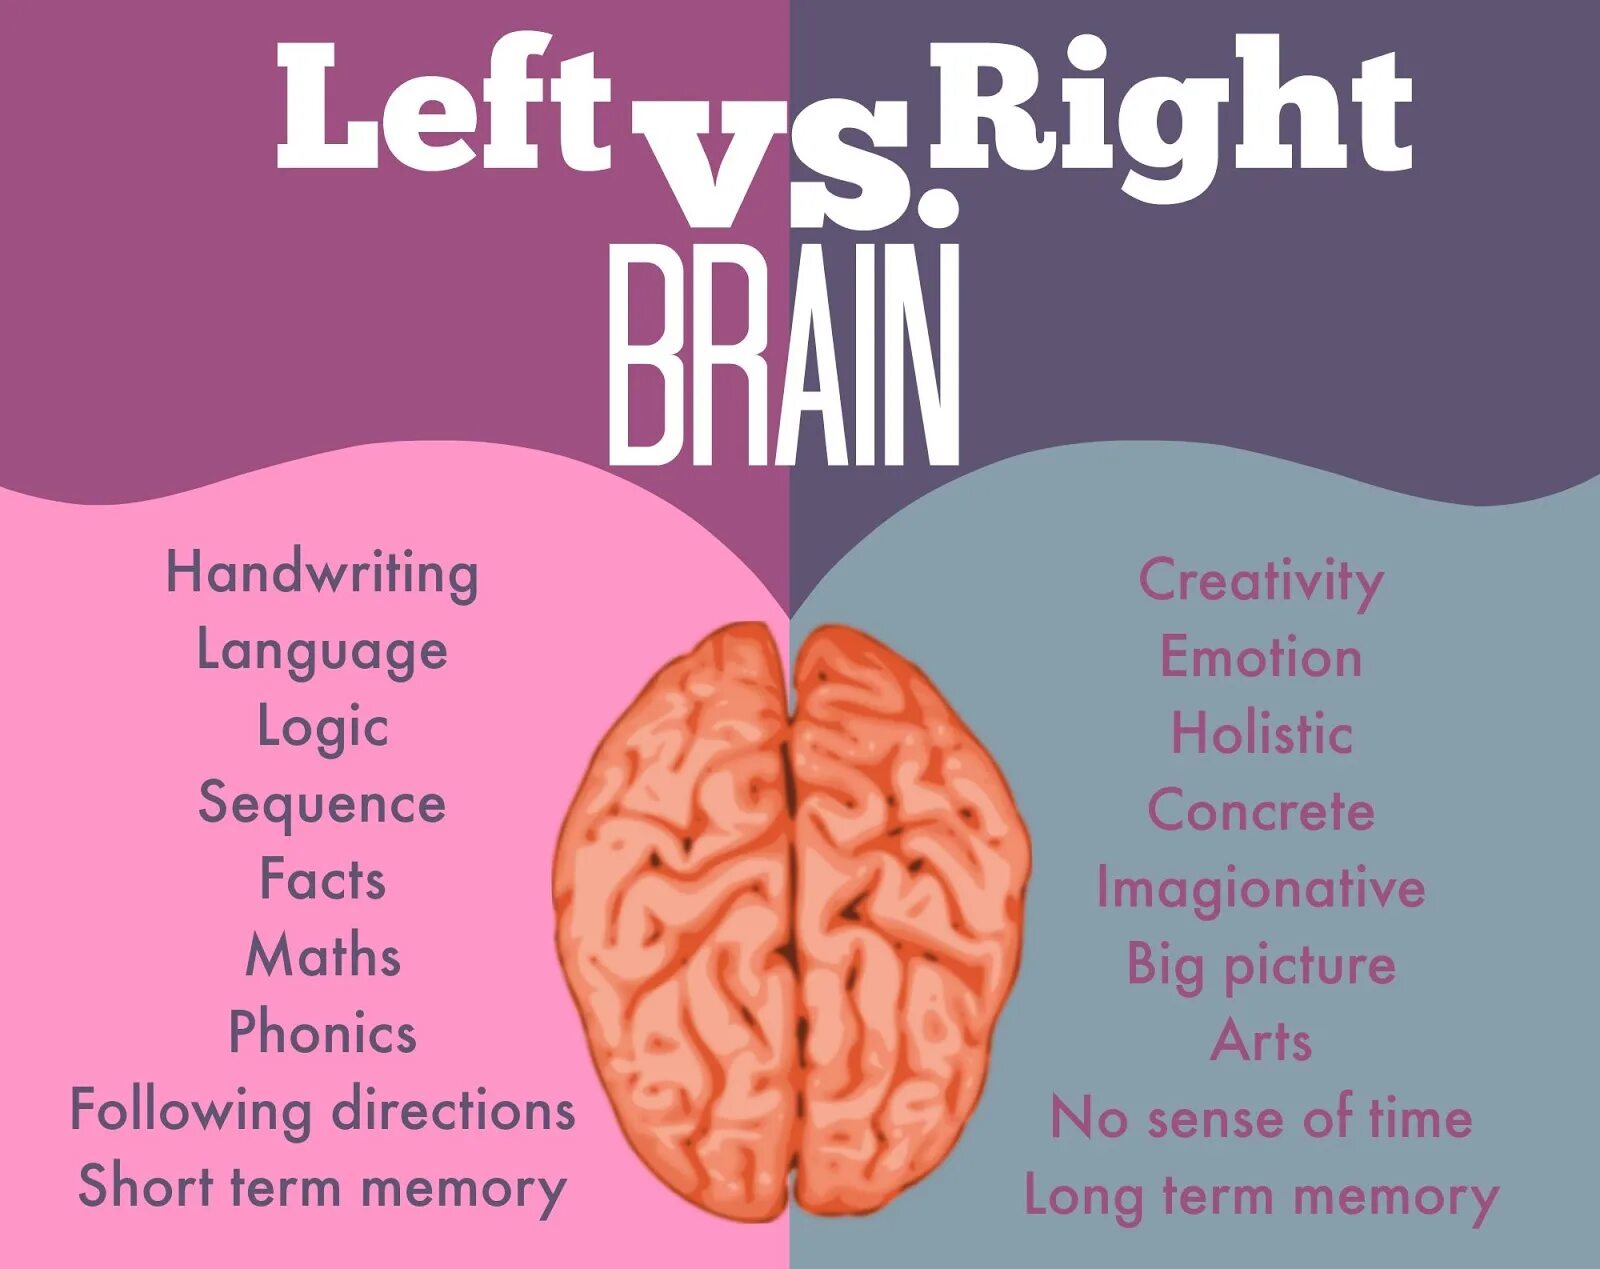 Leave the brain. Left and right Brain. Left Brain right Brain. Left right Side of Brain. Brain left and right Hemisphere.